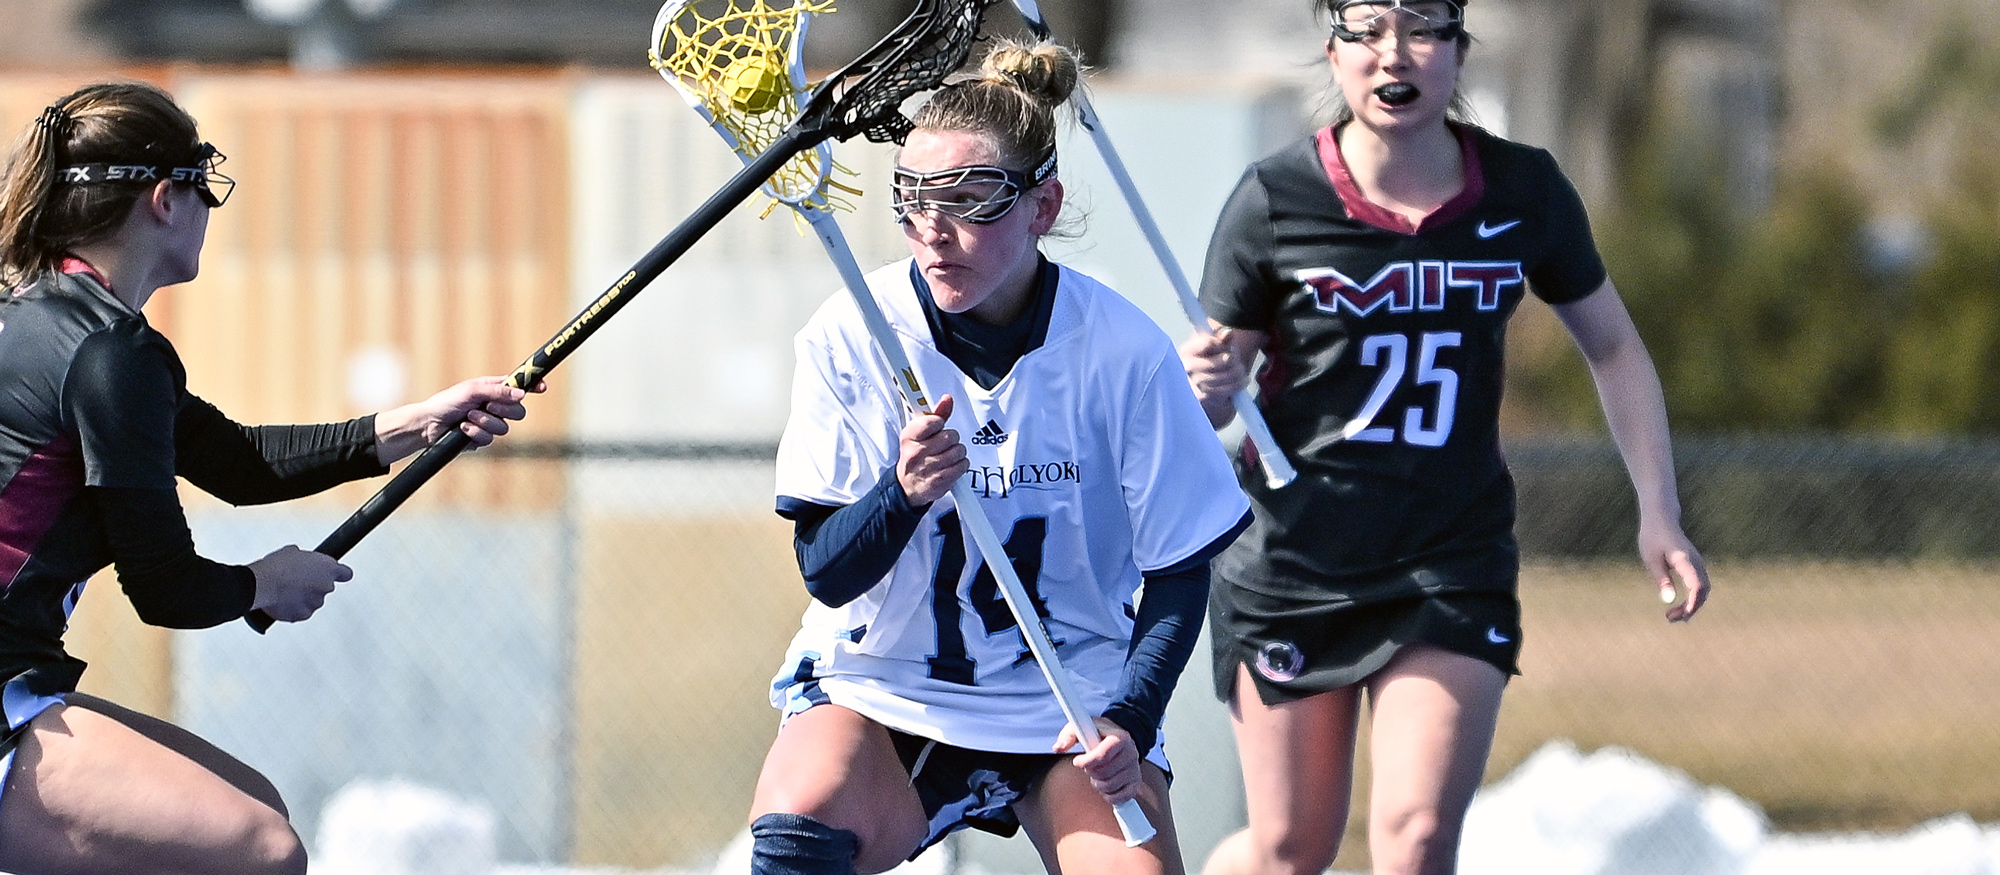 Emi Bisson was everywhere for Mount Holyoke in a 22-11 victory over Rhode Island College on March 22, 2023, as she totaled seven goals, four assists and 14 ground balls. (RJB Sports file photo)